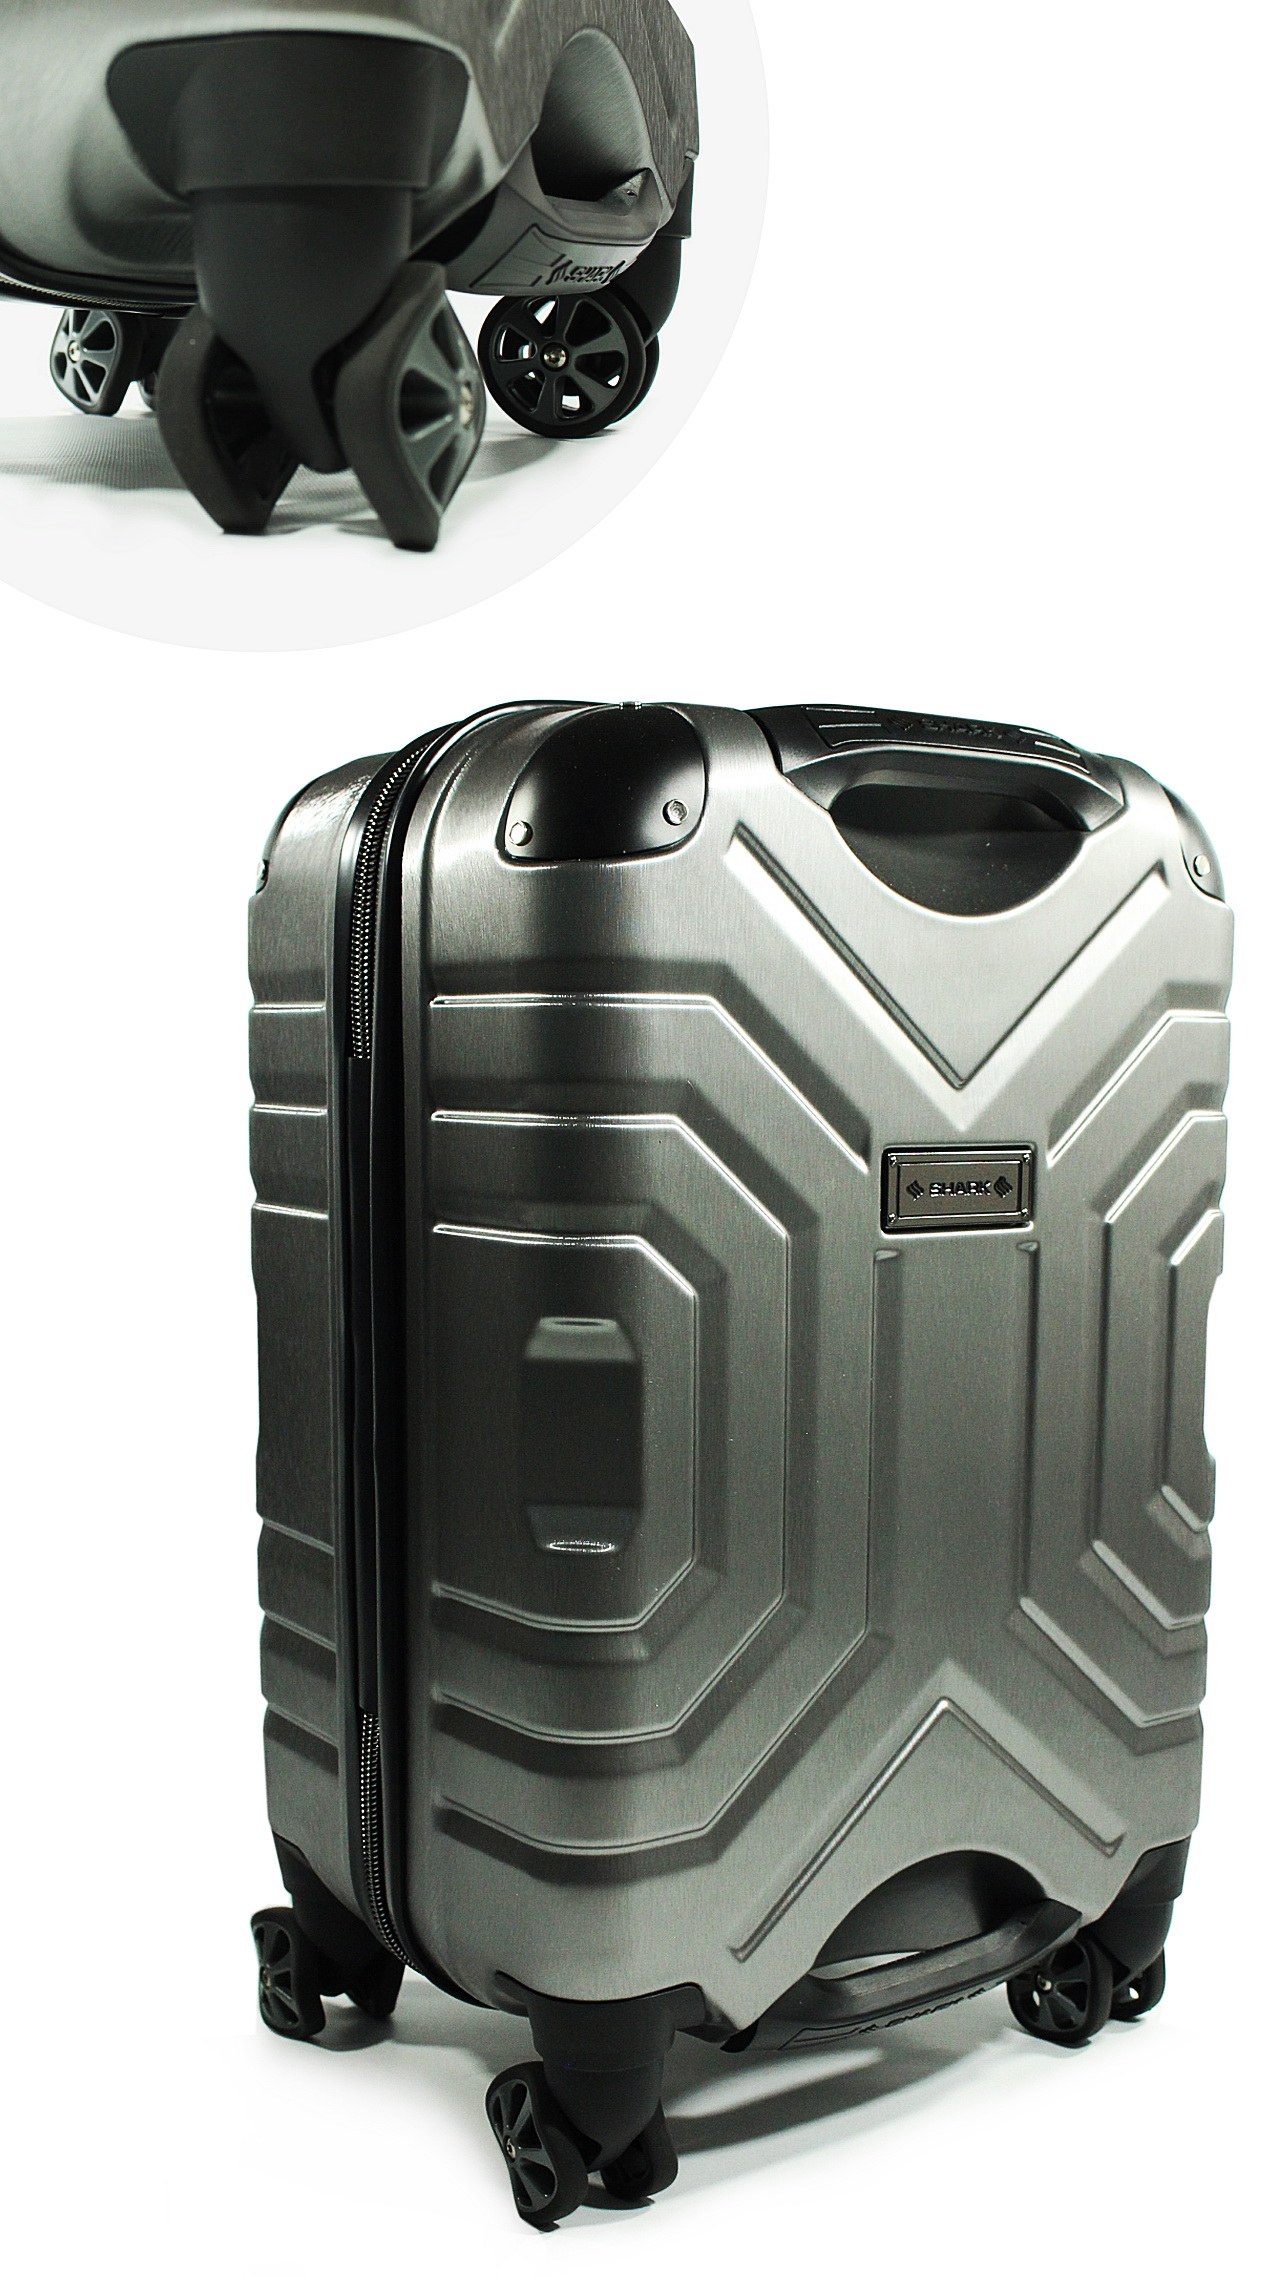 Carry-On Luggage - Shark (Silver/Black)